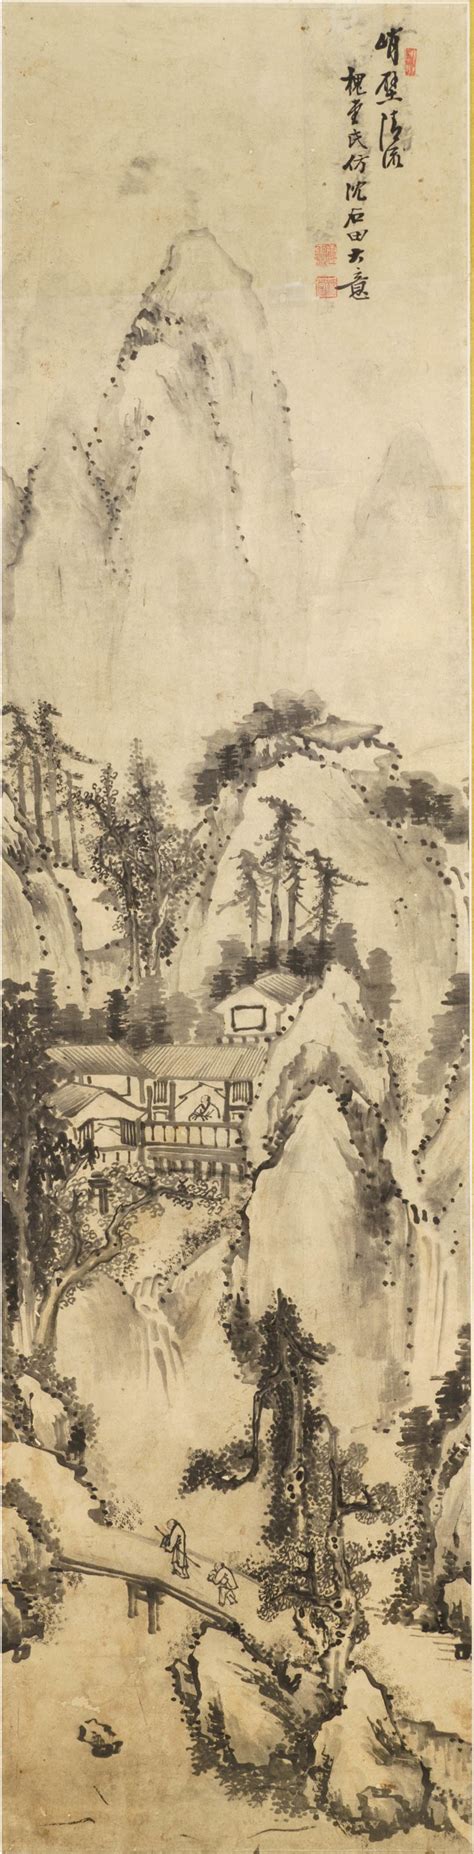 chinese school signed chen shizeng chen hengke  ink  paper mountain landscape